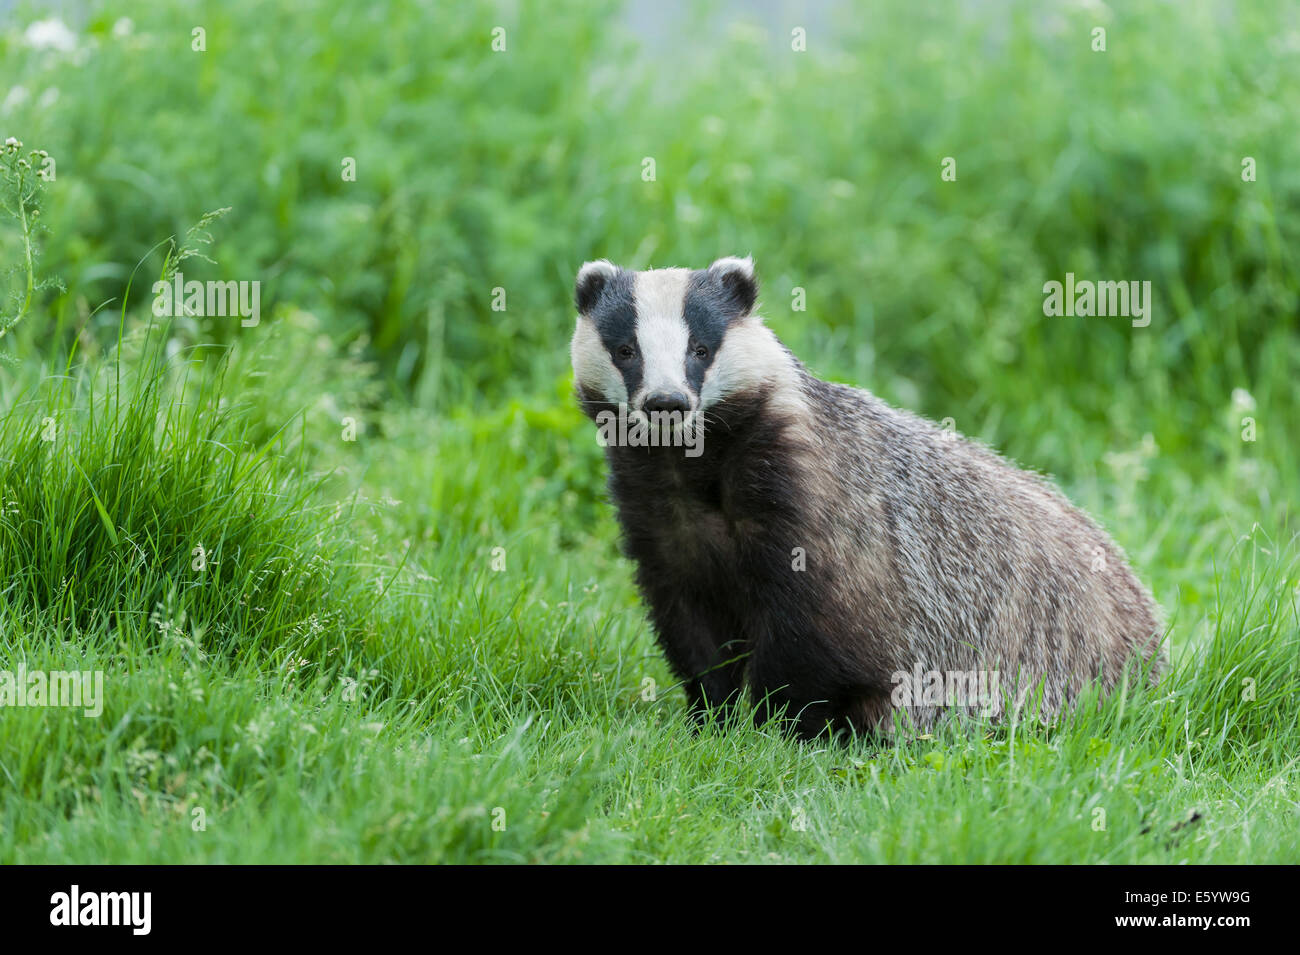 Badger playing and posing in grass Stock Photo